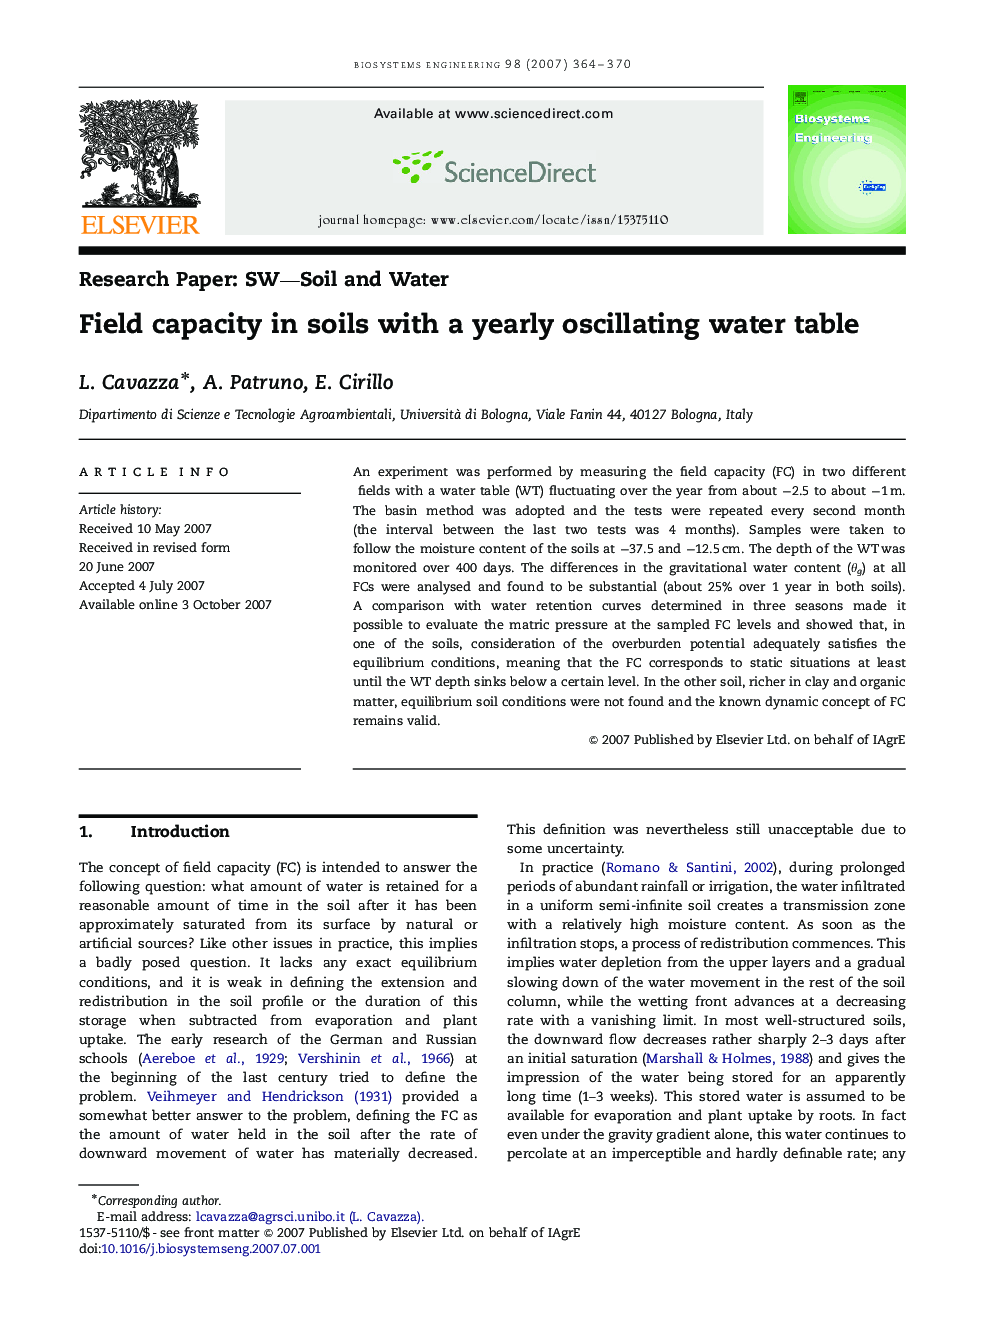 Field capacity in soils with a yearly oscillating water table